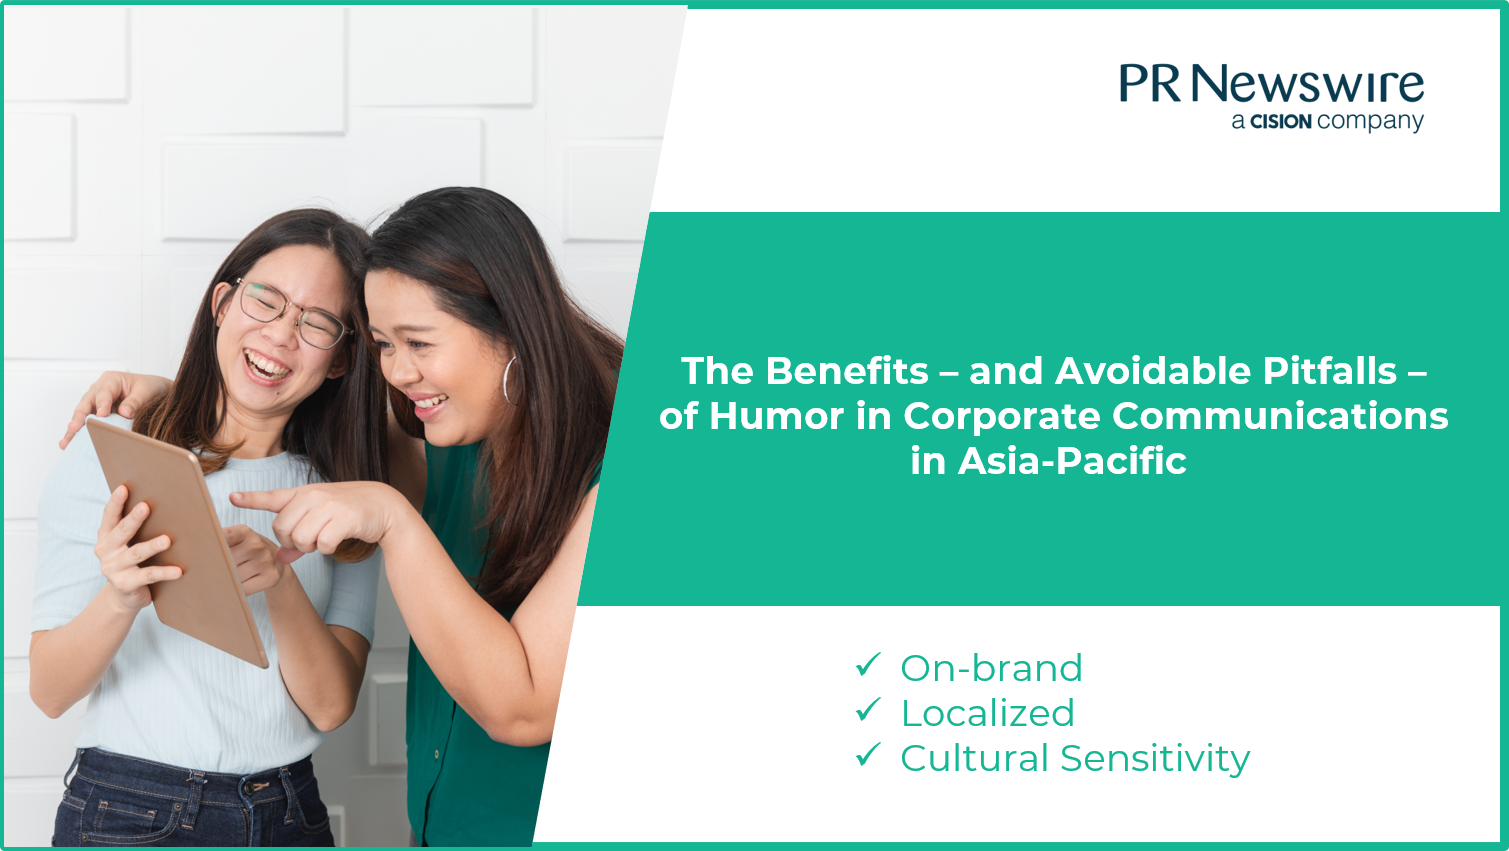 The Benefits – and Avoidable Pitfalls – of Humor in Asia-Pacific Corporate Communications